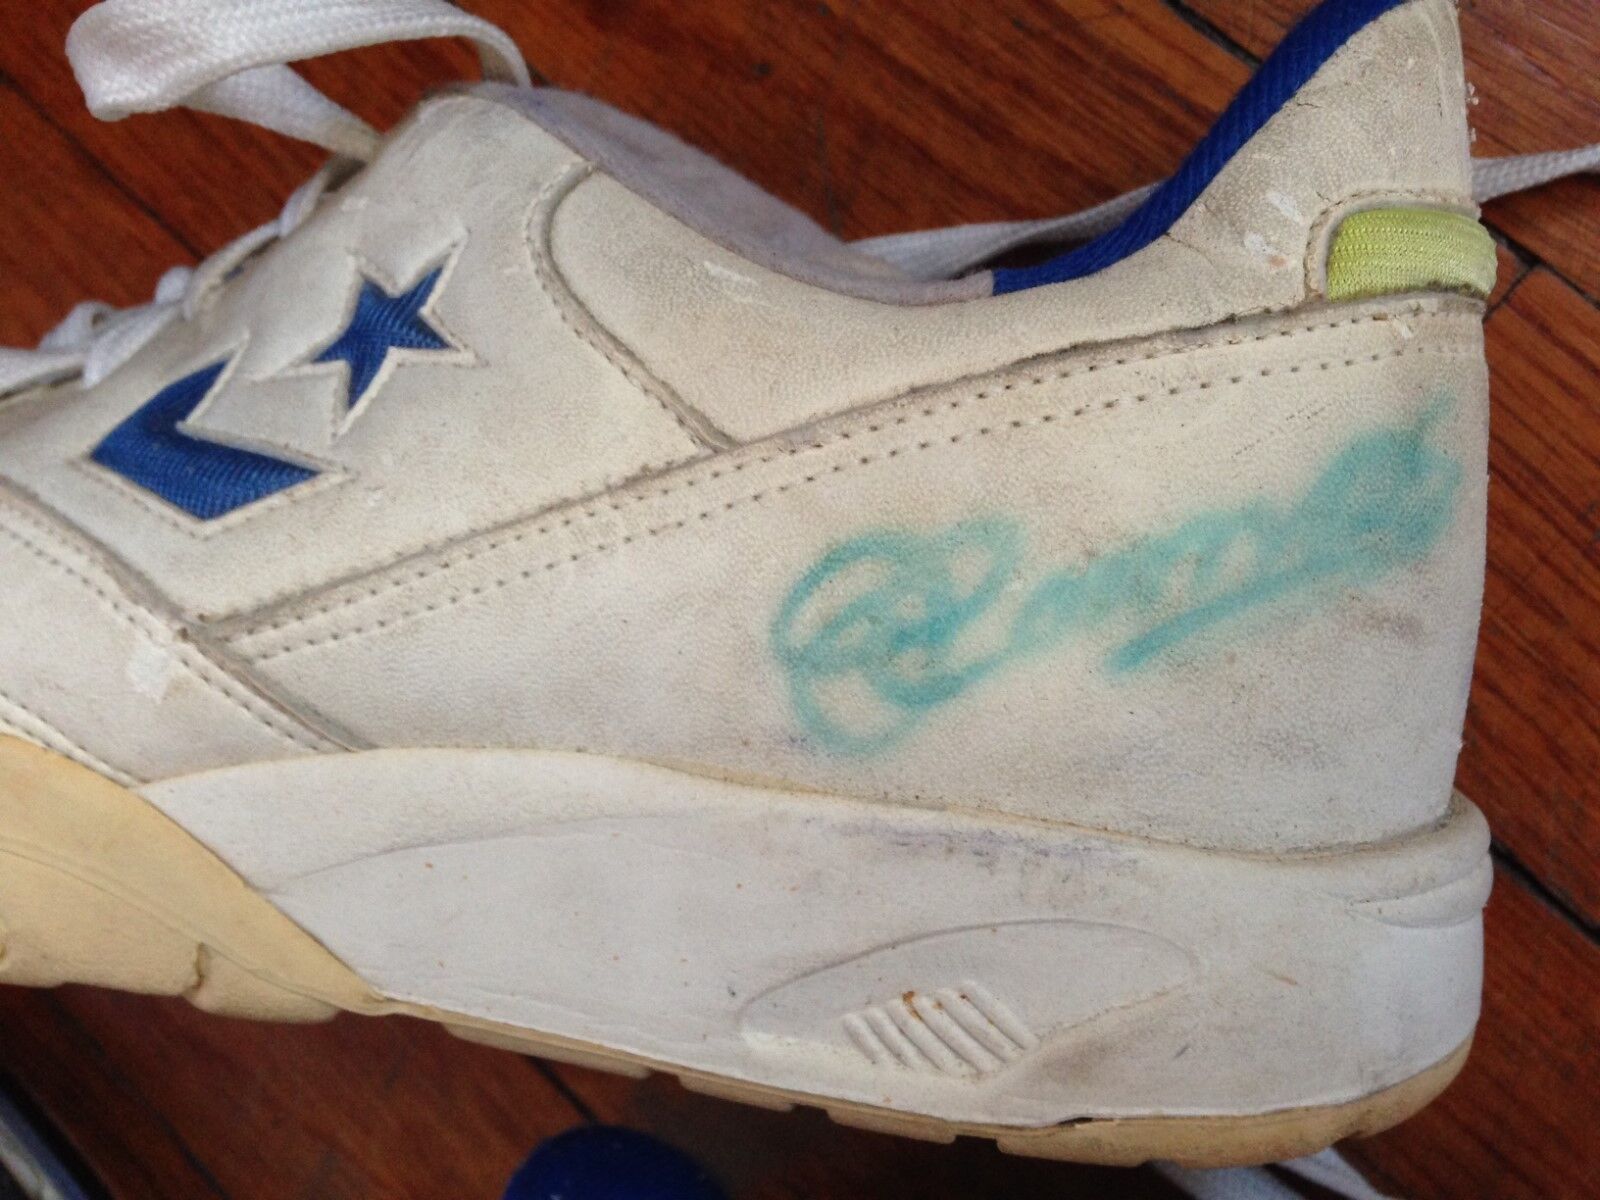 C. 1990'S JIMMY CONNORS SIGNED GAME WORN SNEAKERS, U.S. OPEN BALL,RACKET & COVER Без бренда - фотография #4